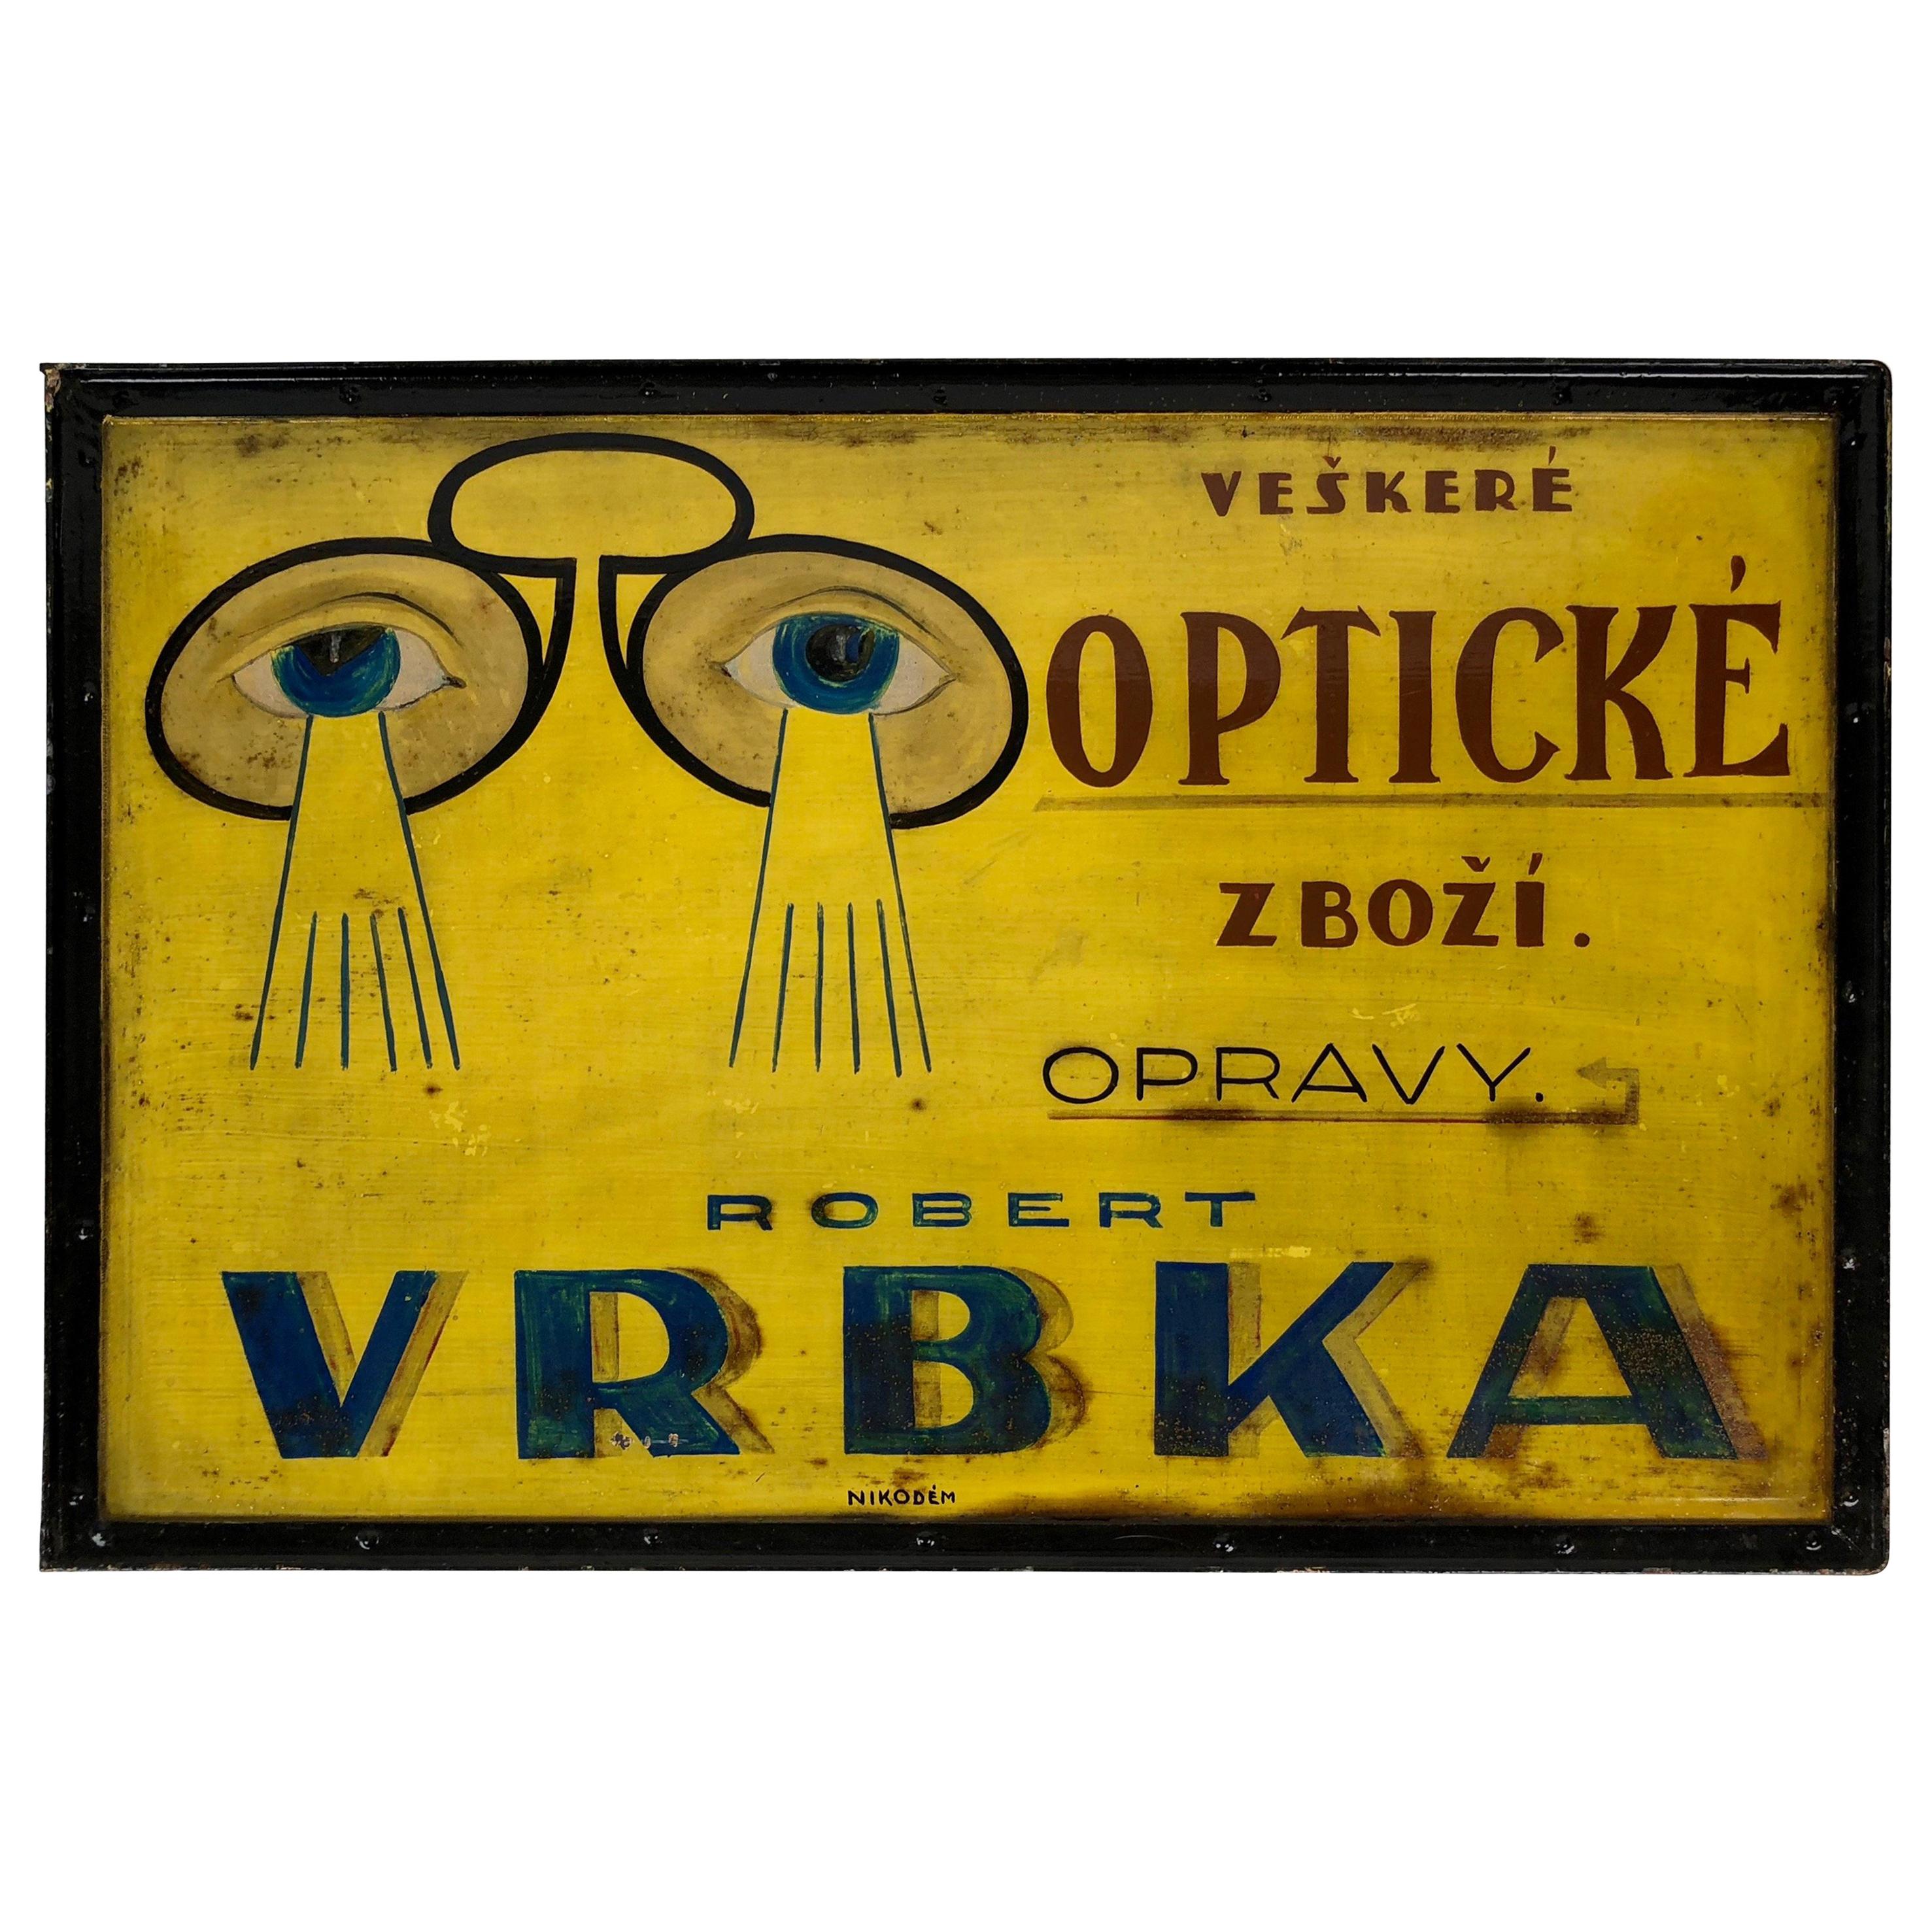 Advertising Sign for an Optician, from 1920s